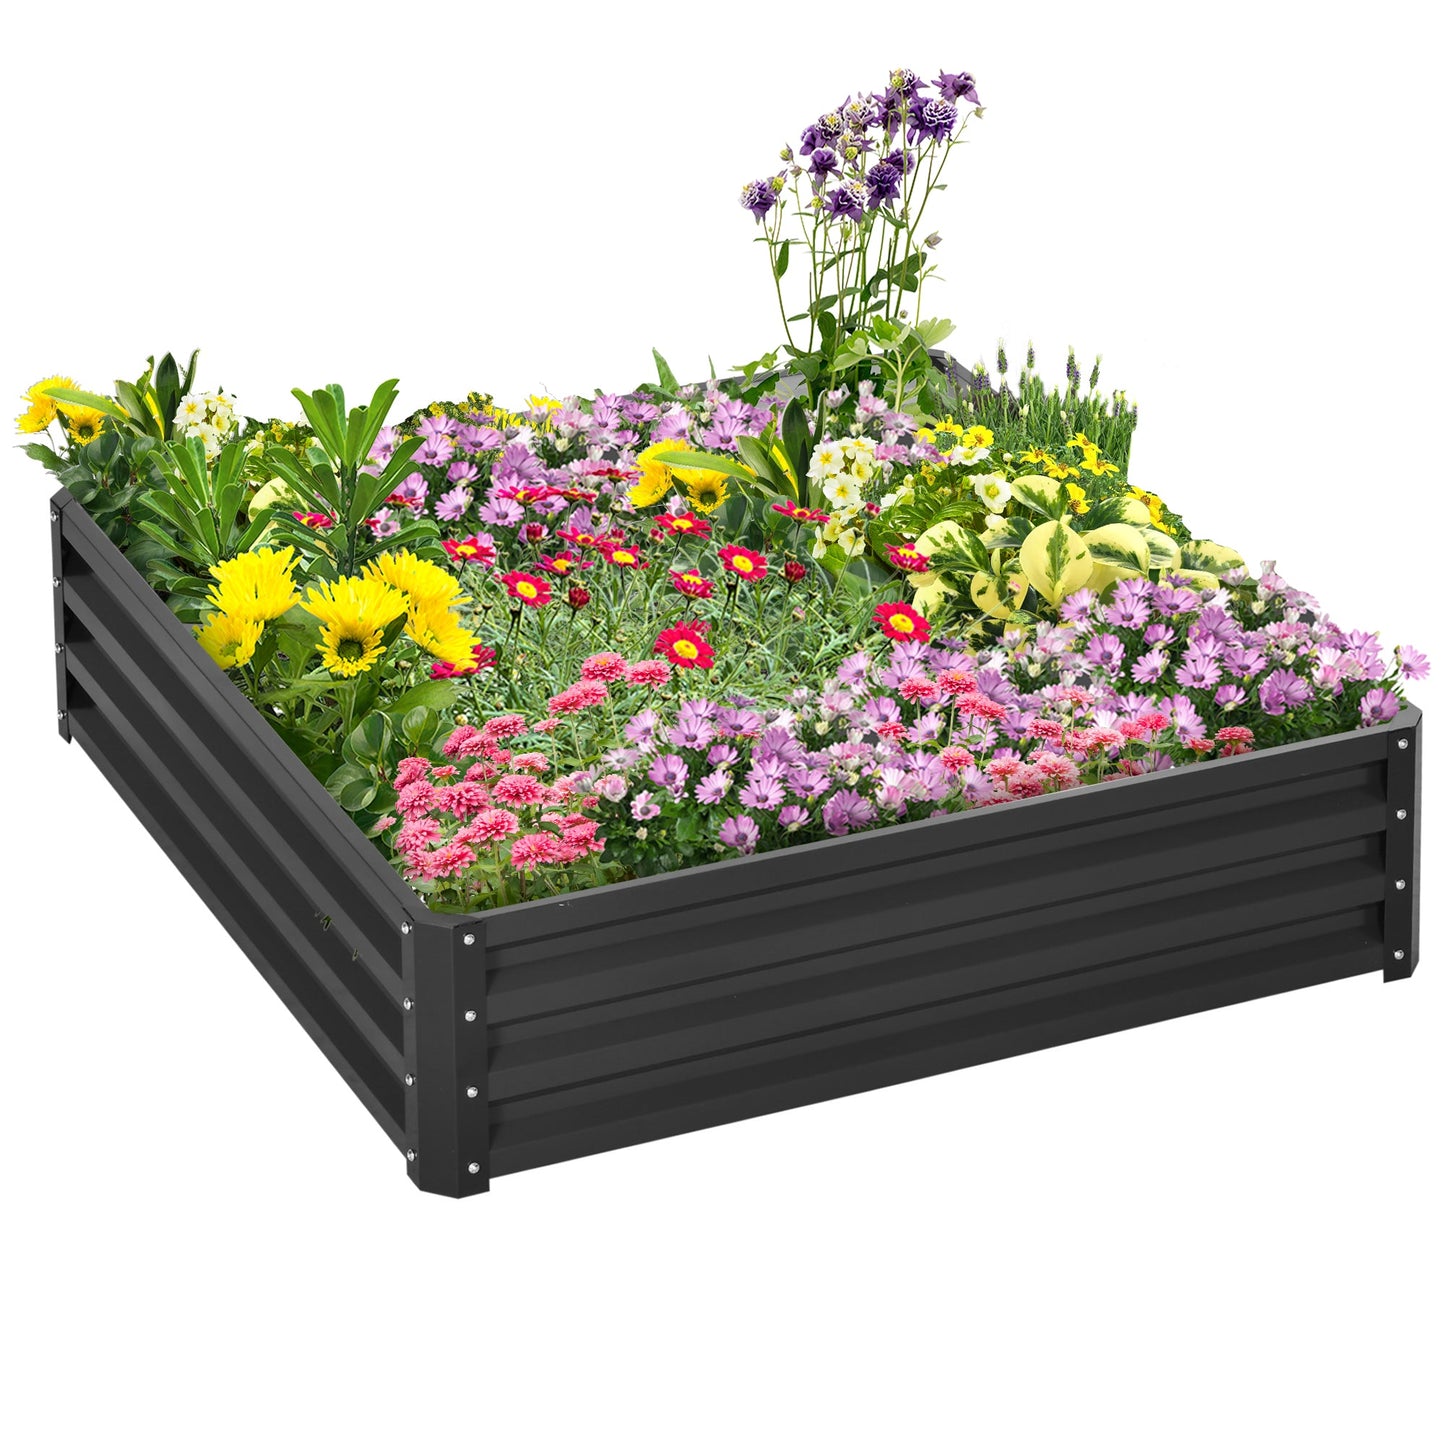 4' x 4' x 1' Raised Garden Bed Galvanized Steel Planter Box for Vegetables, Flowers, Herbs, Grey at Gallery Canada